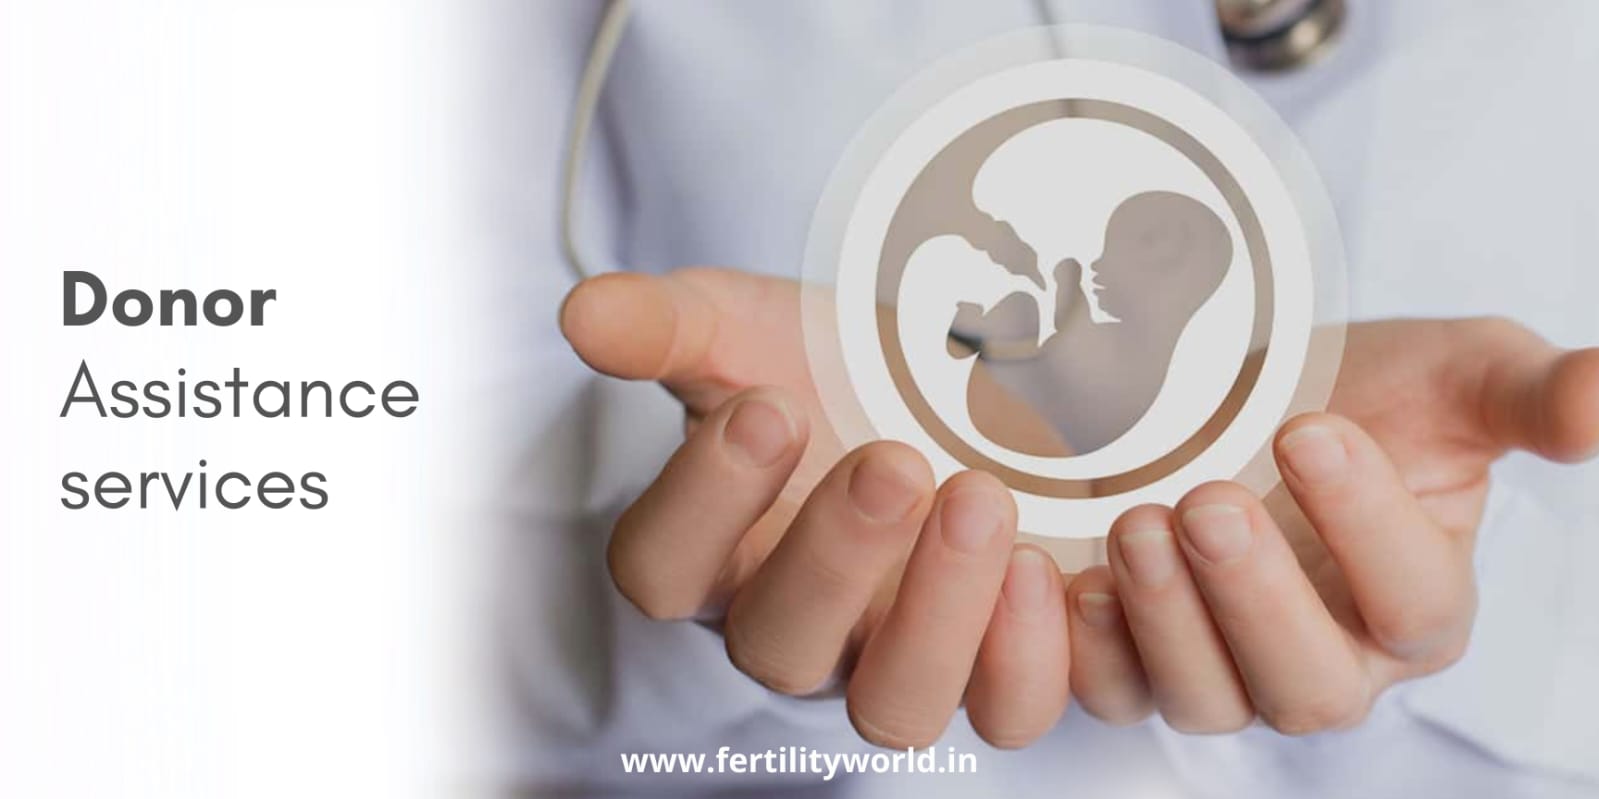 Donor Assistance services for IVF in Bangalore